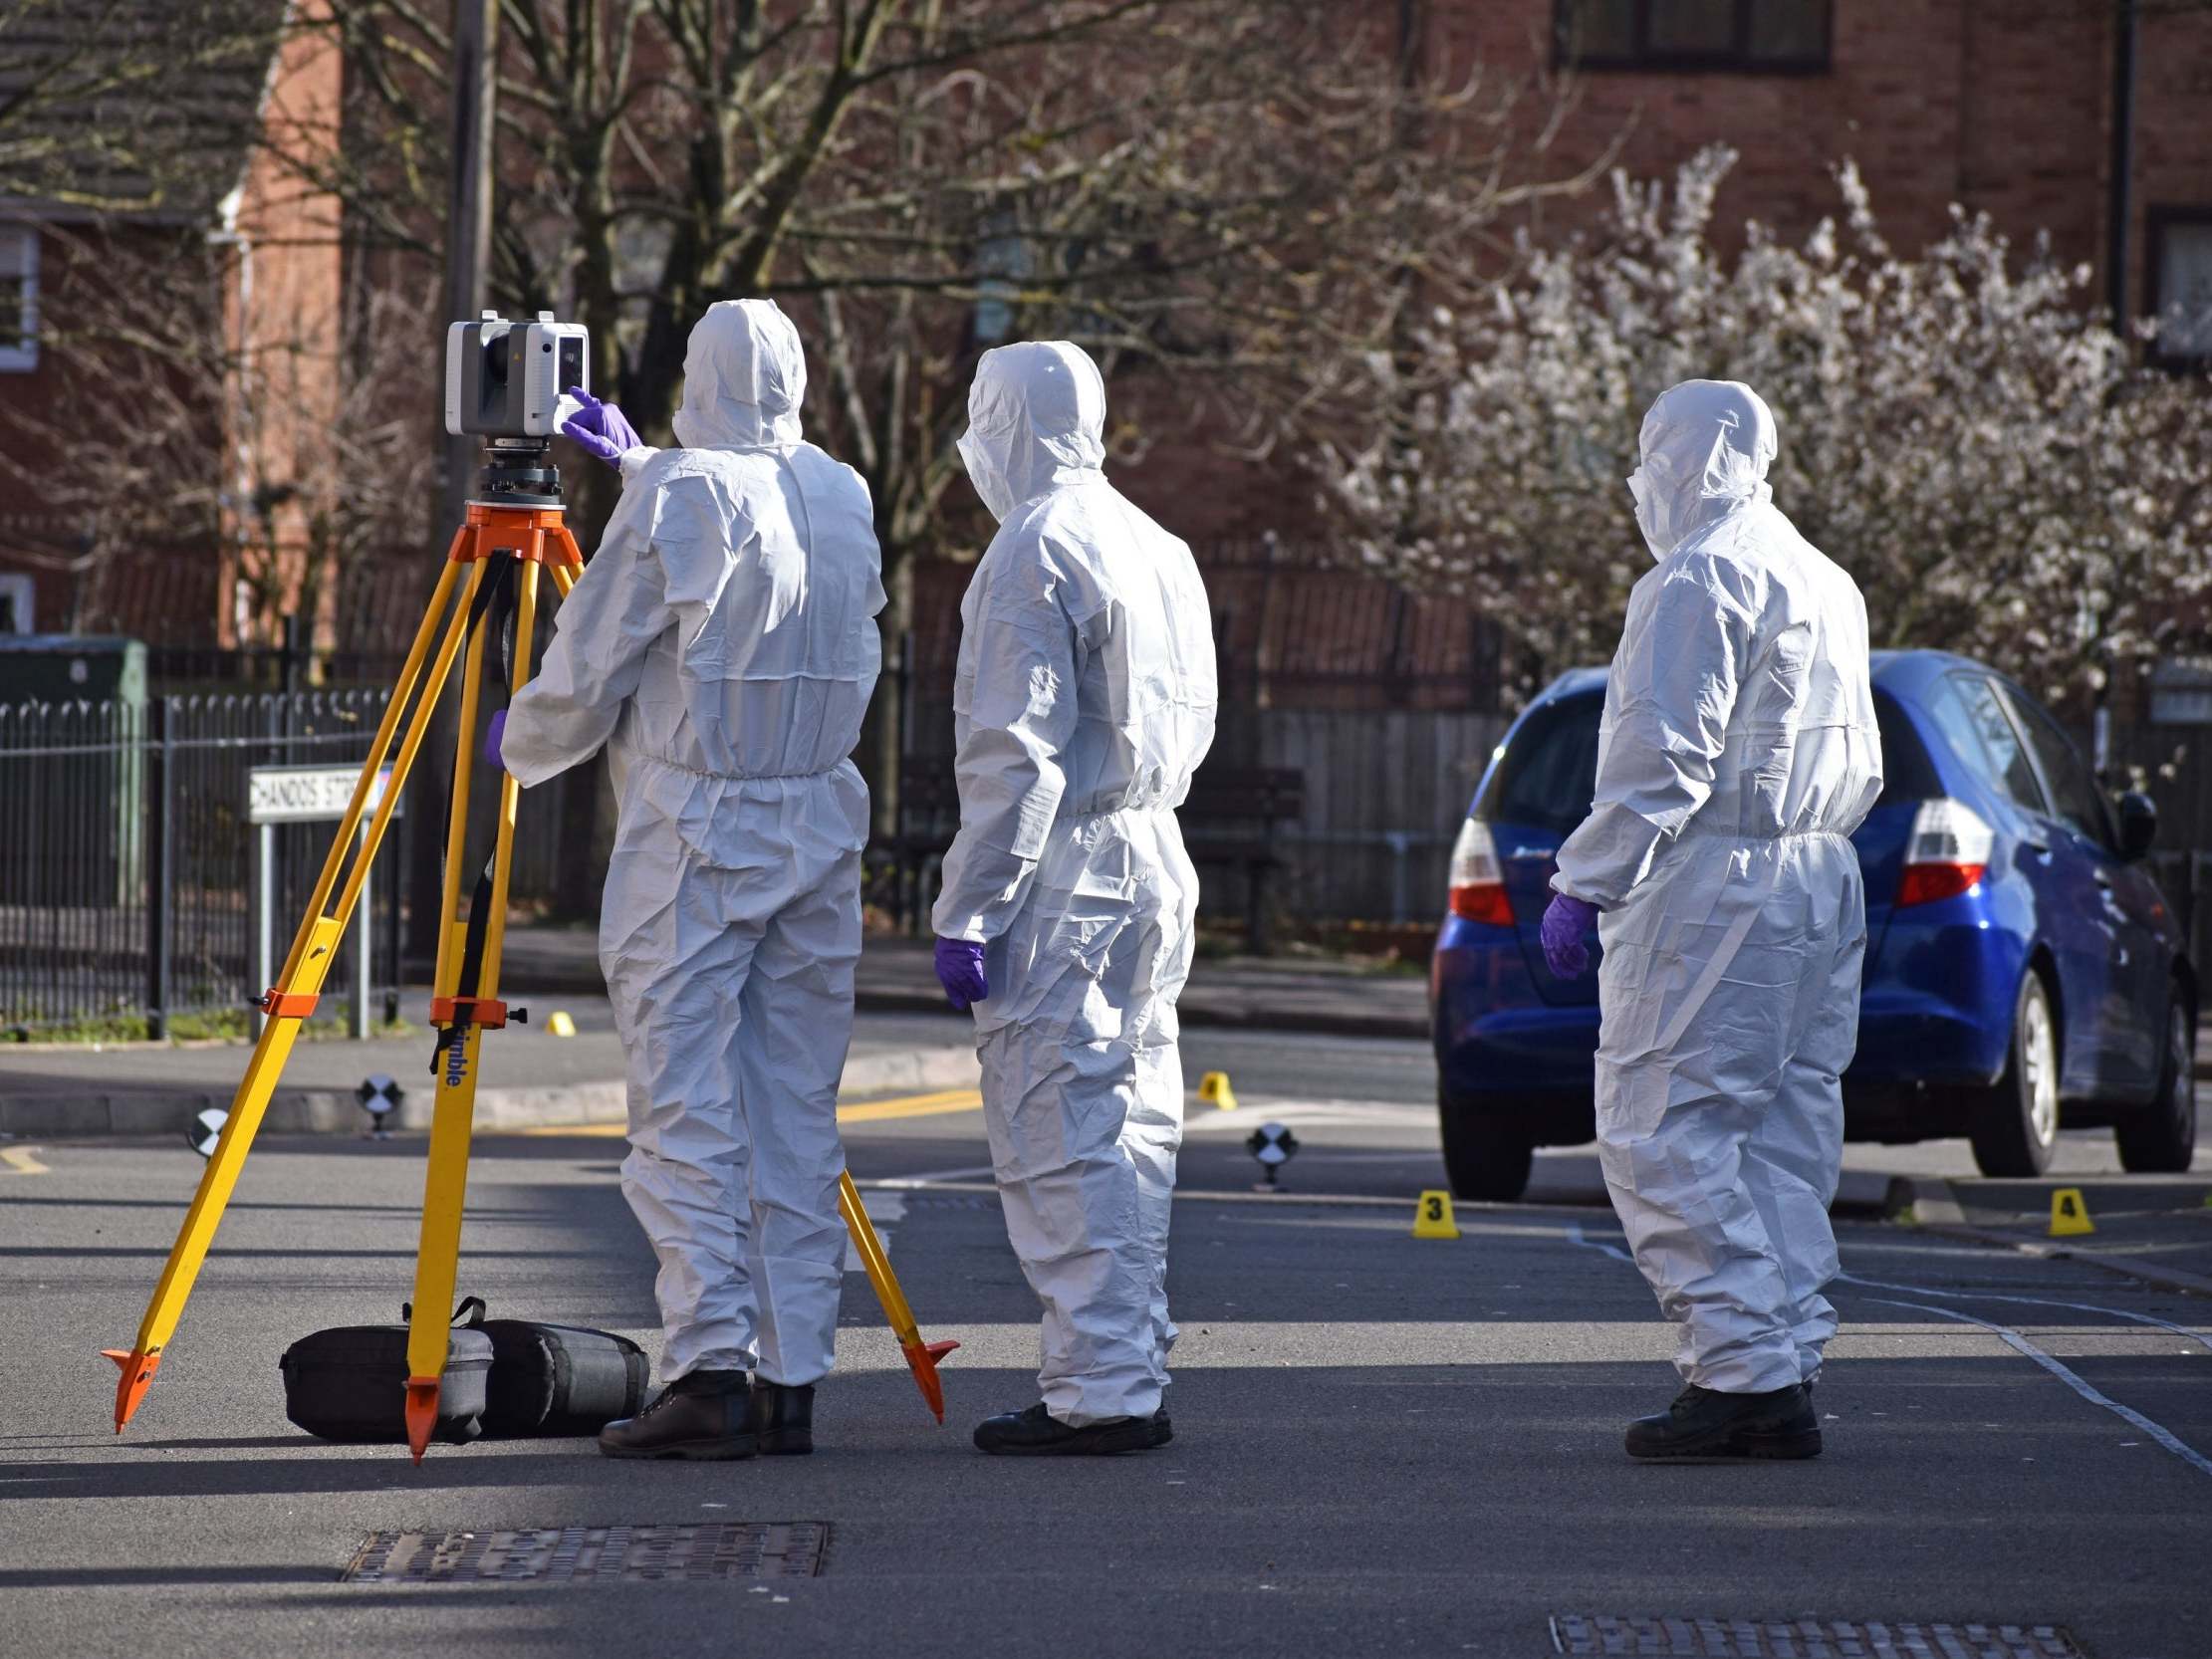 Police forensics officers in Chandos Street, Coventry, on 1 March 2020 after the death of a 16-year-old boy was stabbed to death overnight. (Matthew Cooper/PA )